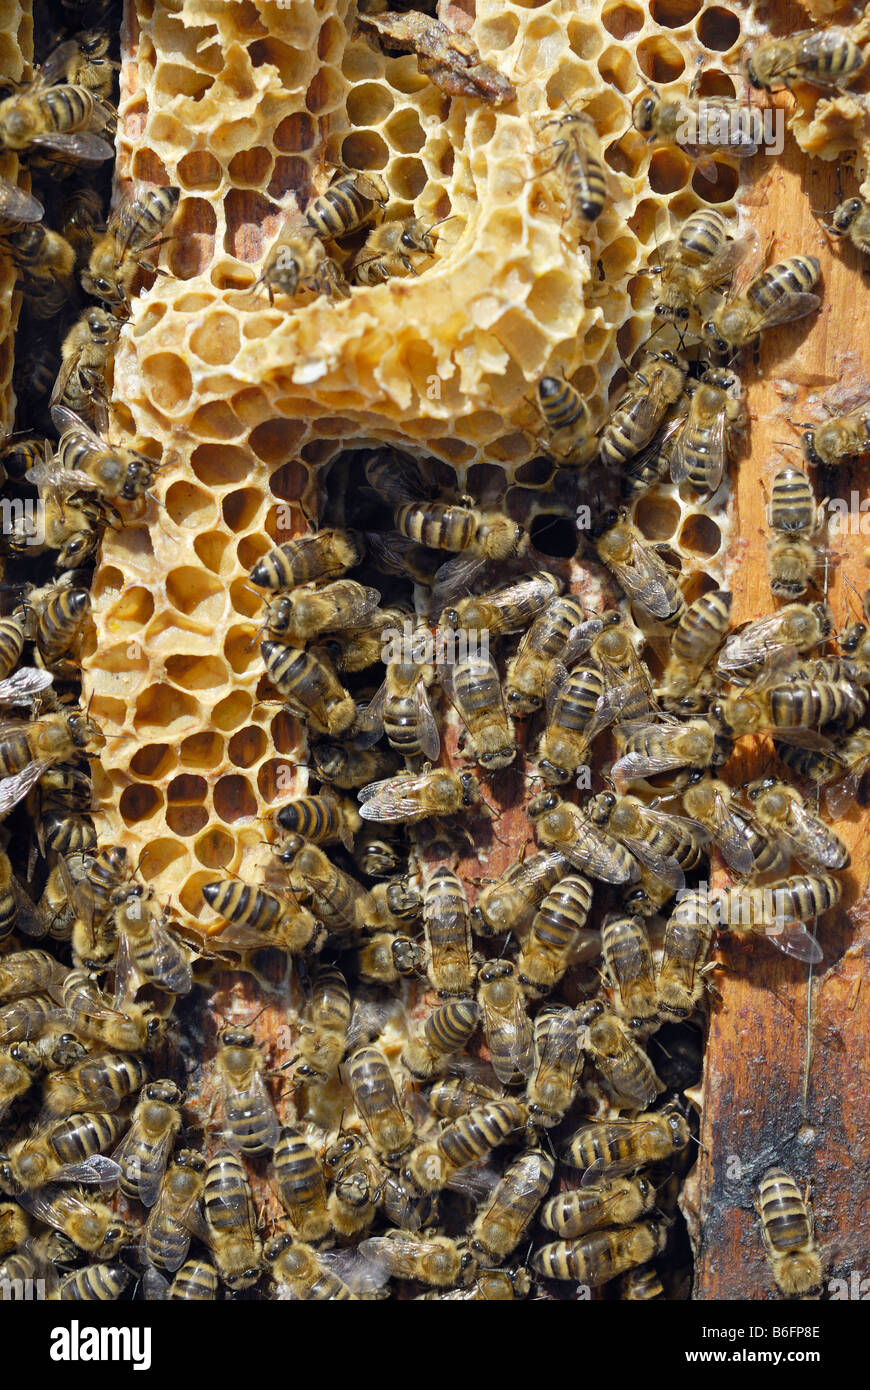 Honey bees (Apis melifera ssp. carnica) and wax honeycomb coming out from the beeway between the frames of an opened beehive Stock Photo